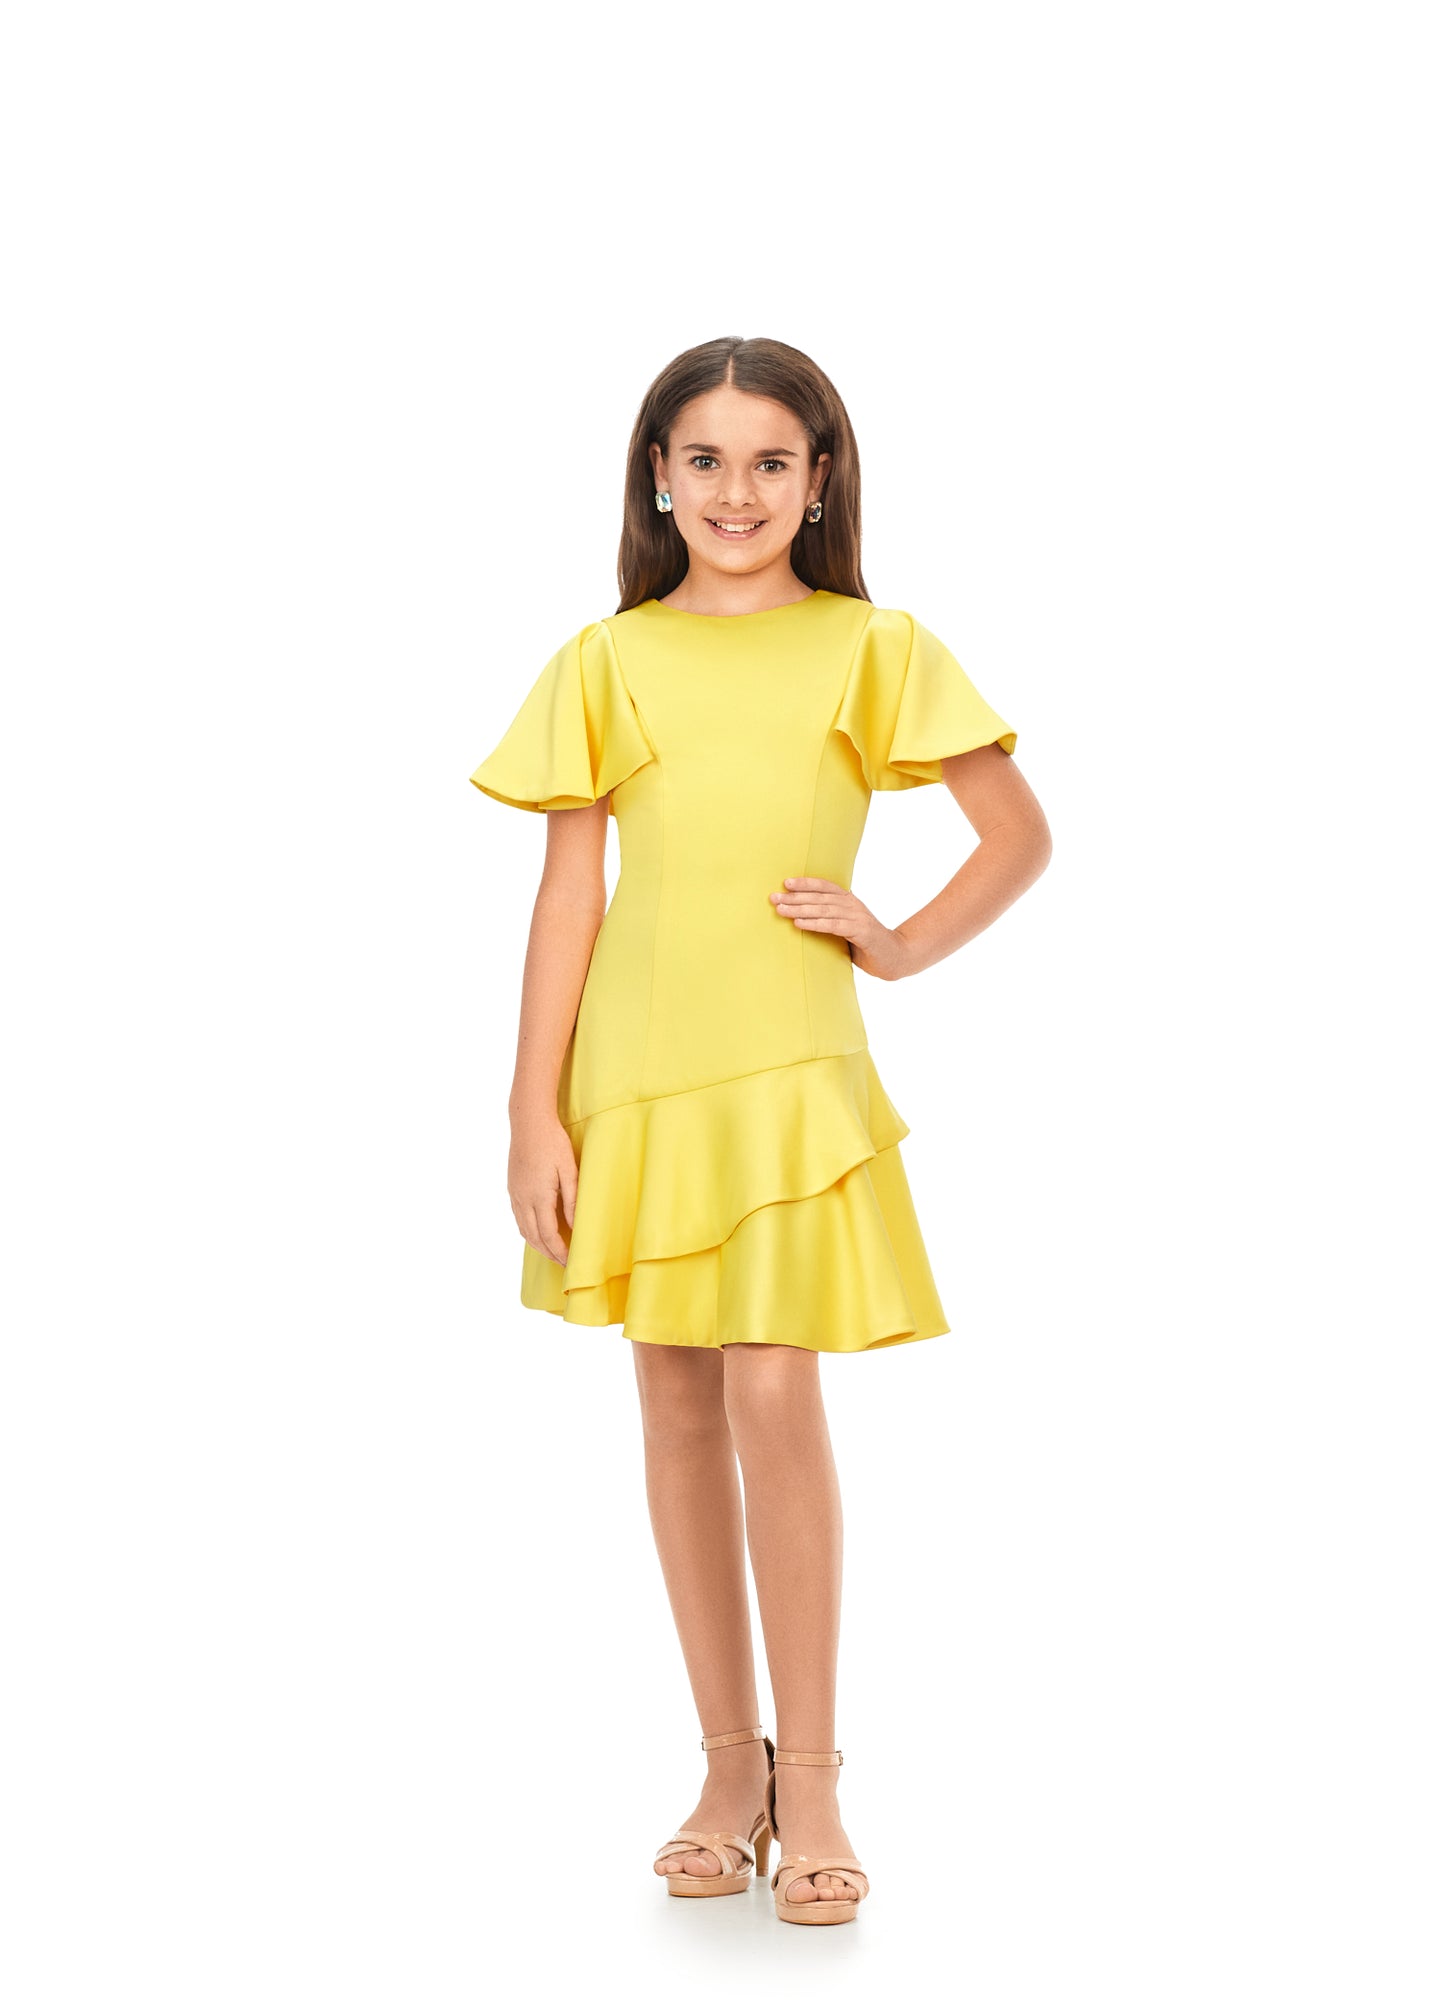 Ashley Lauren Kids 8167 Girls Crepe Cocktail Dress with Ruffle Details  A crepe dress perfect for any event. This dress features flutter sleeves and an asymmetric ruffle skirt yellow